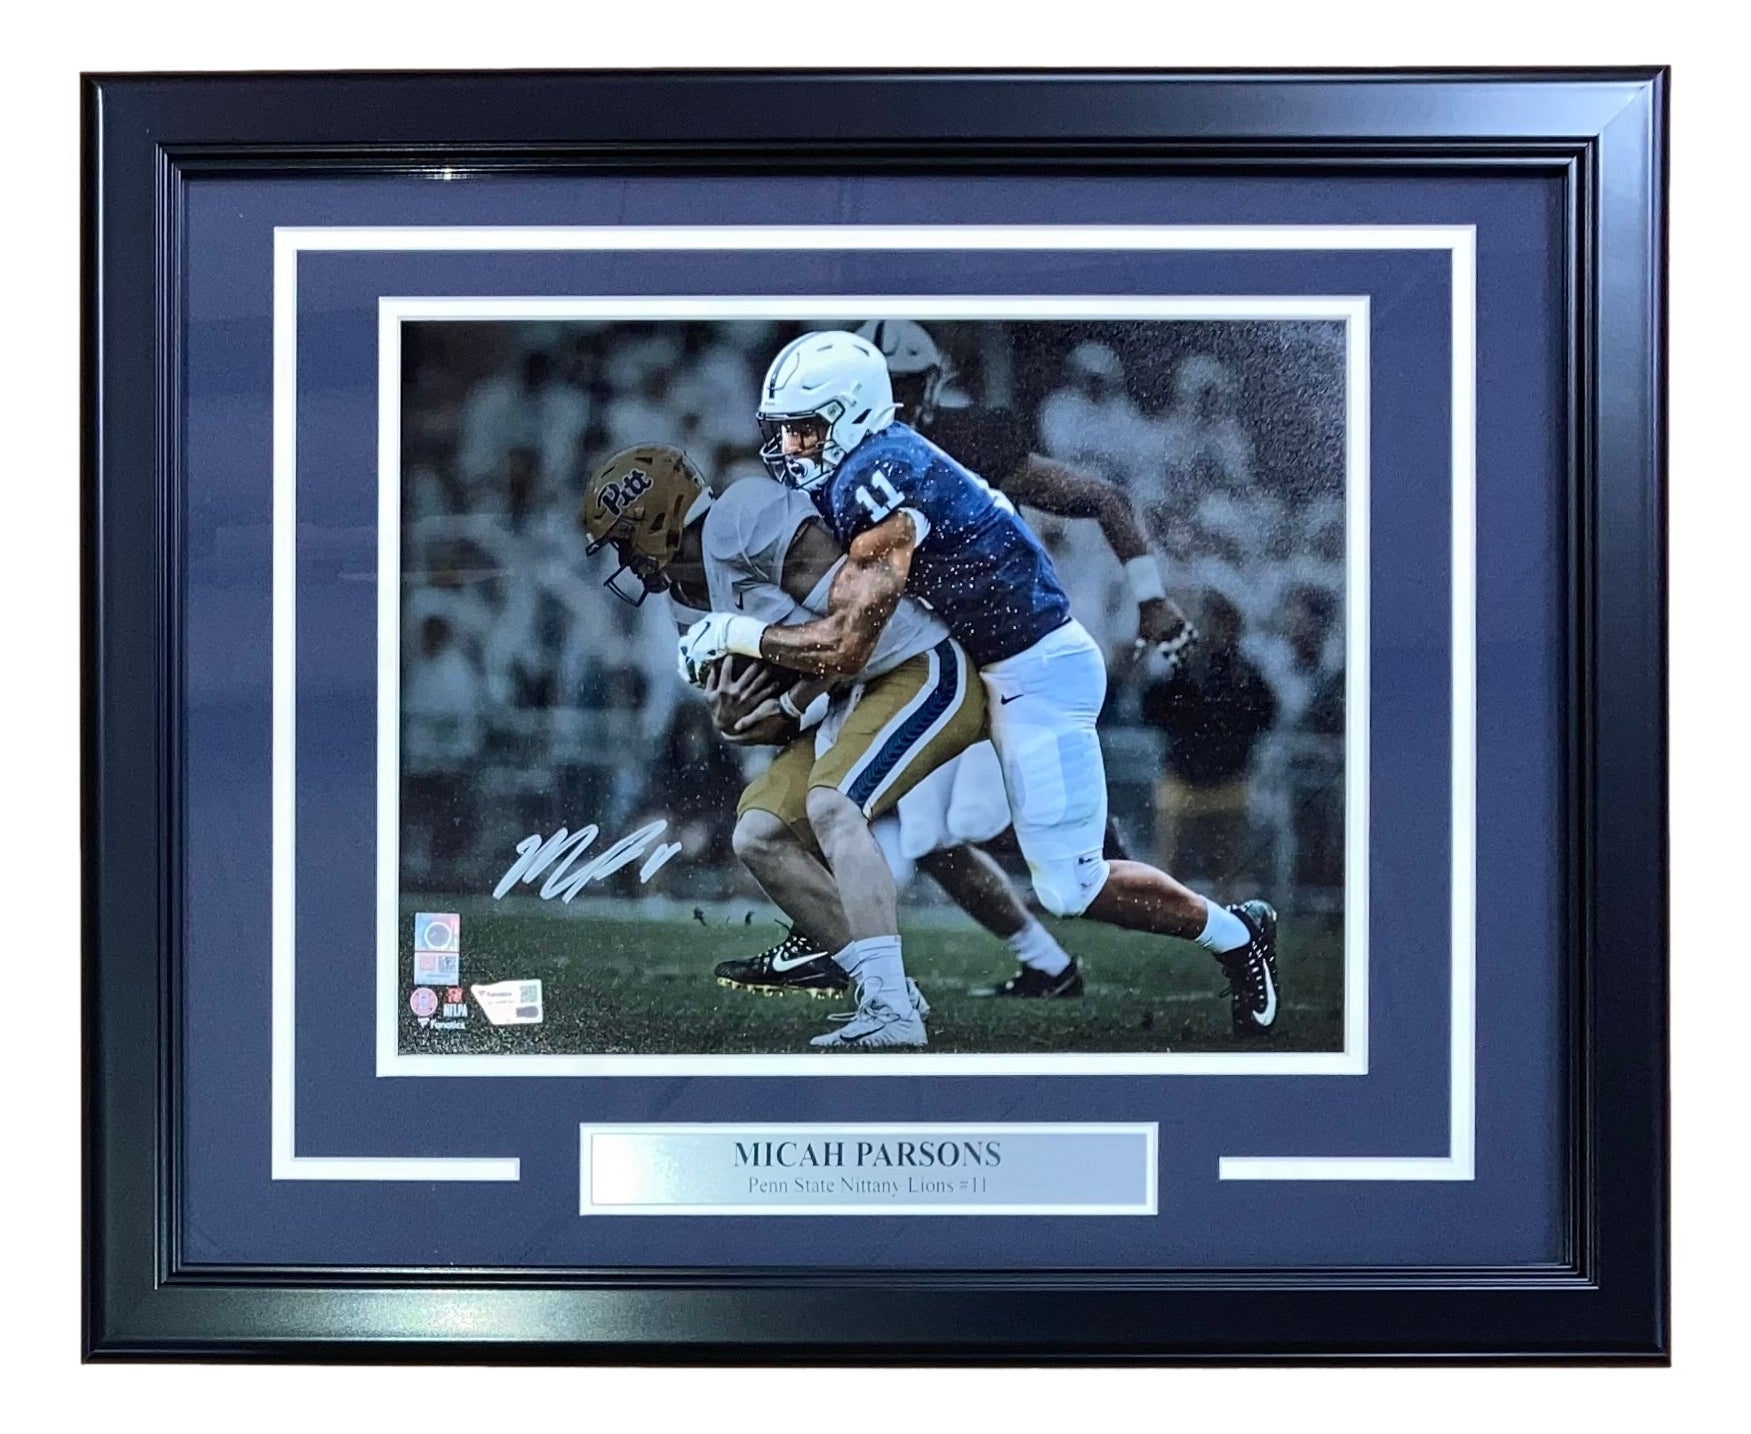 Micah Parsons Signed Framed 11x14 Penn State Nittany Lions Photo Fanatics